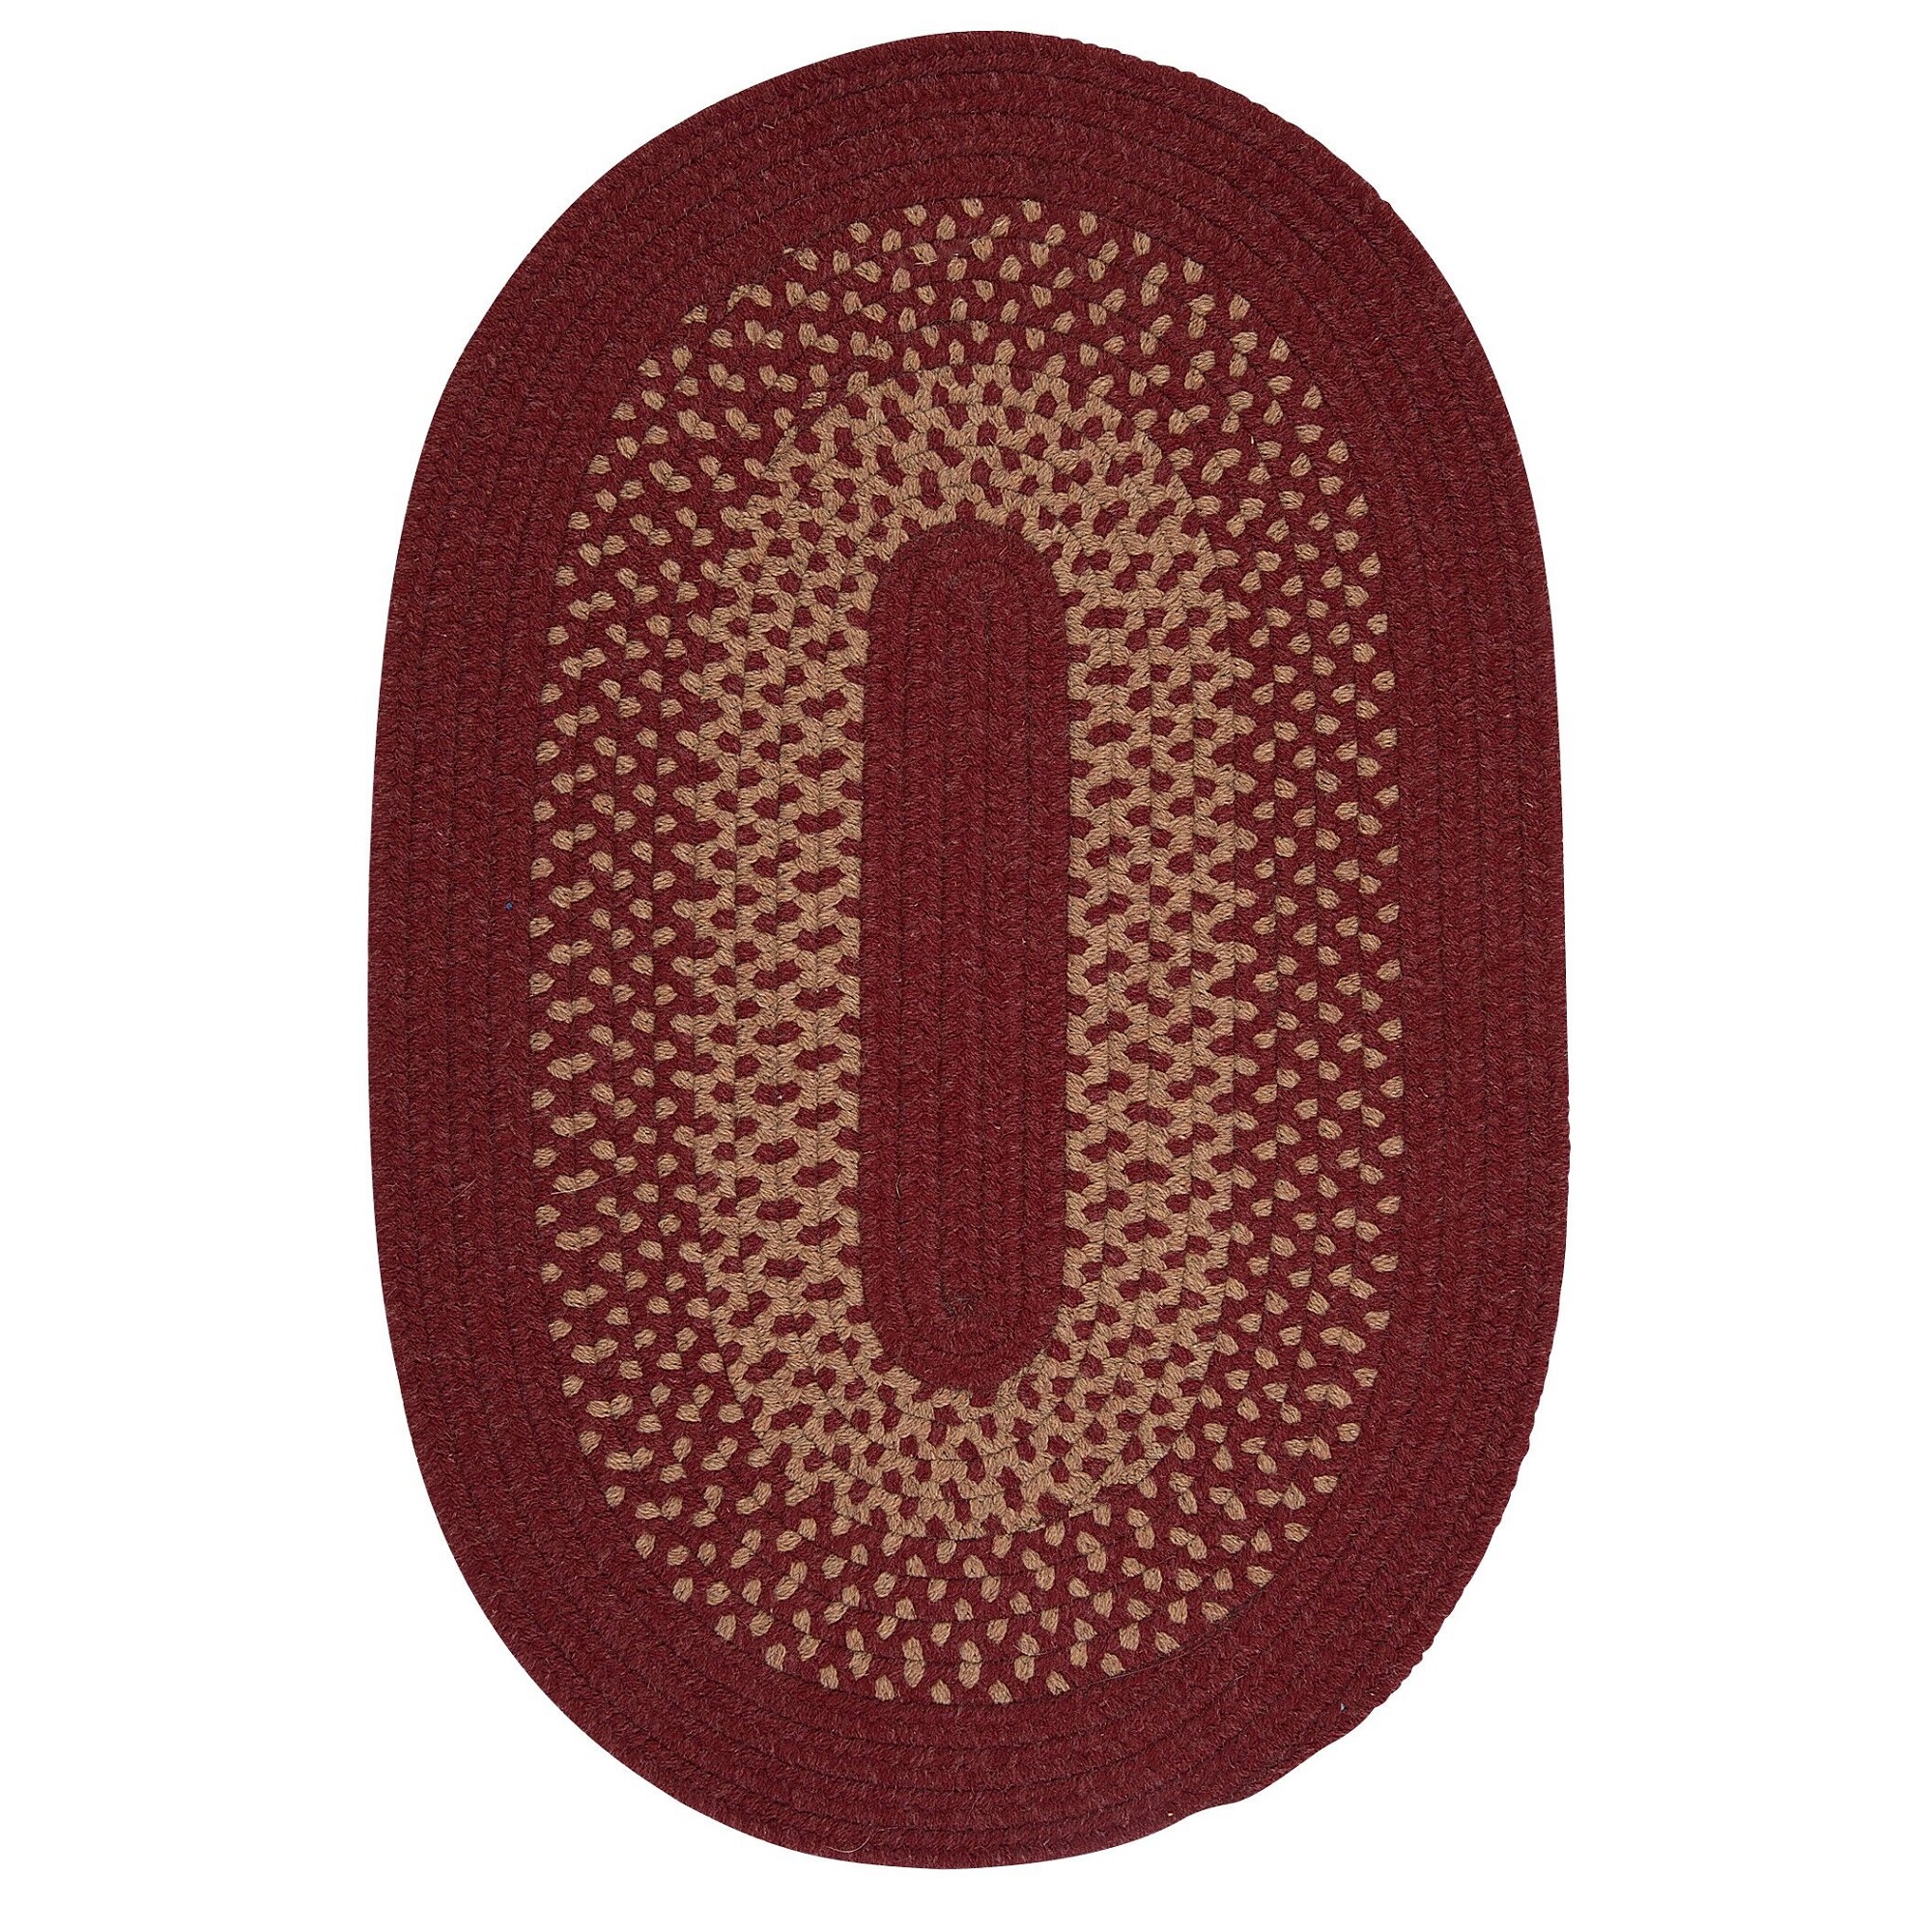 Colonial Mills 2' x 8' Red and Beige Braided Oval Area Throw Rug Runner